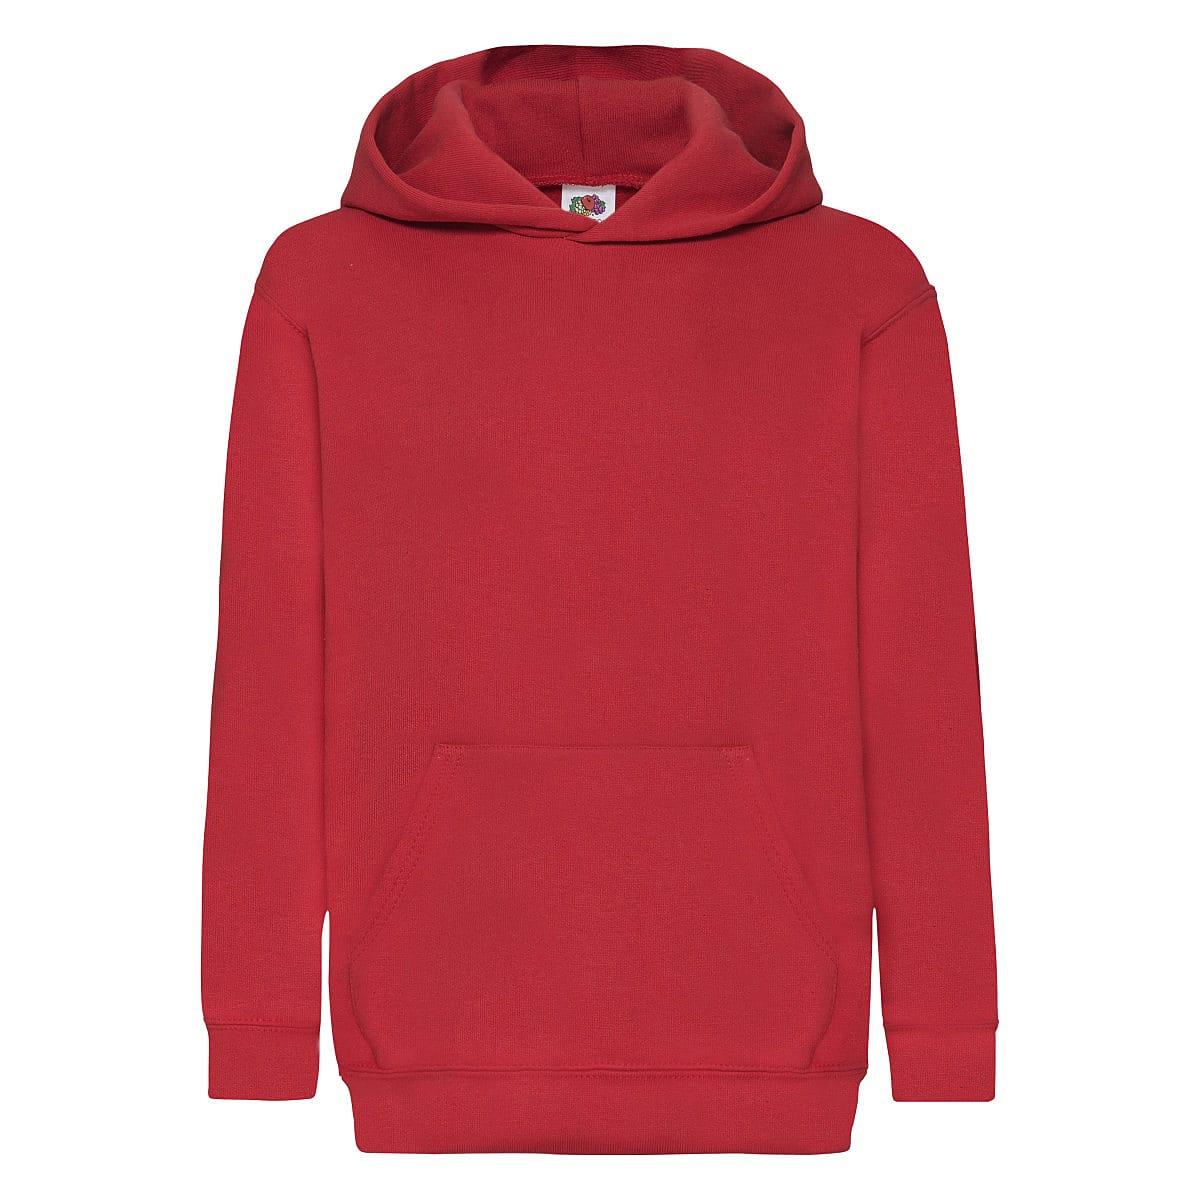 Fruit Of The Loom Childrens Hoodie in Red (Product Code: 62043)